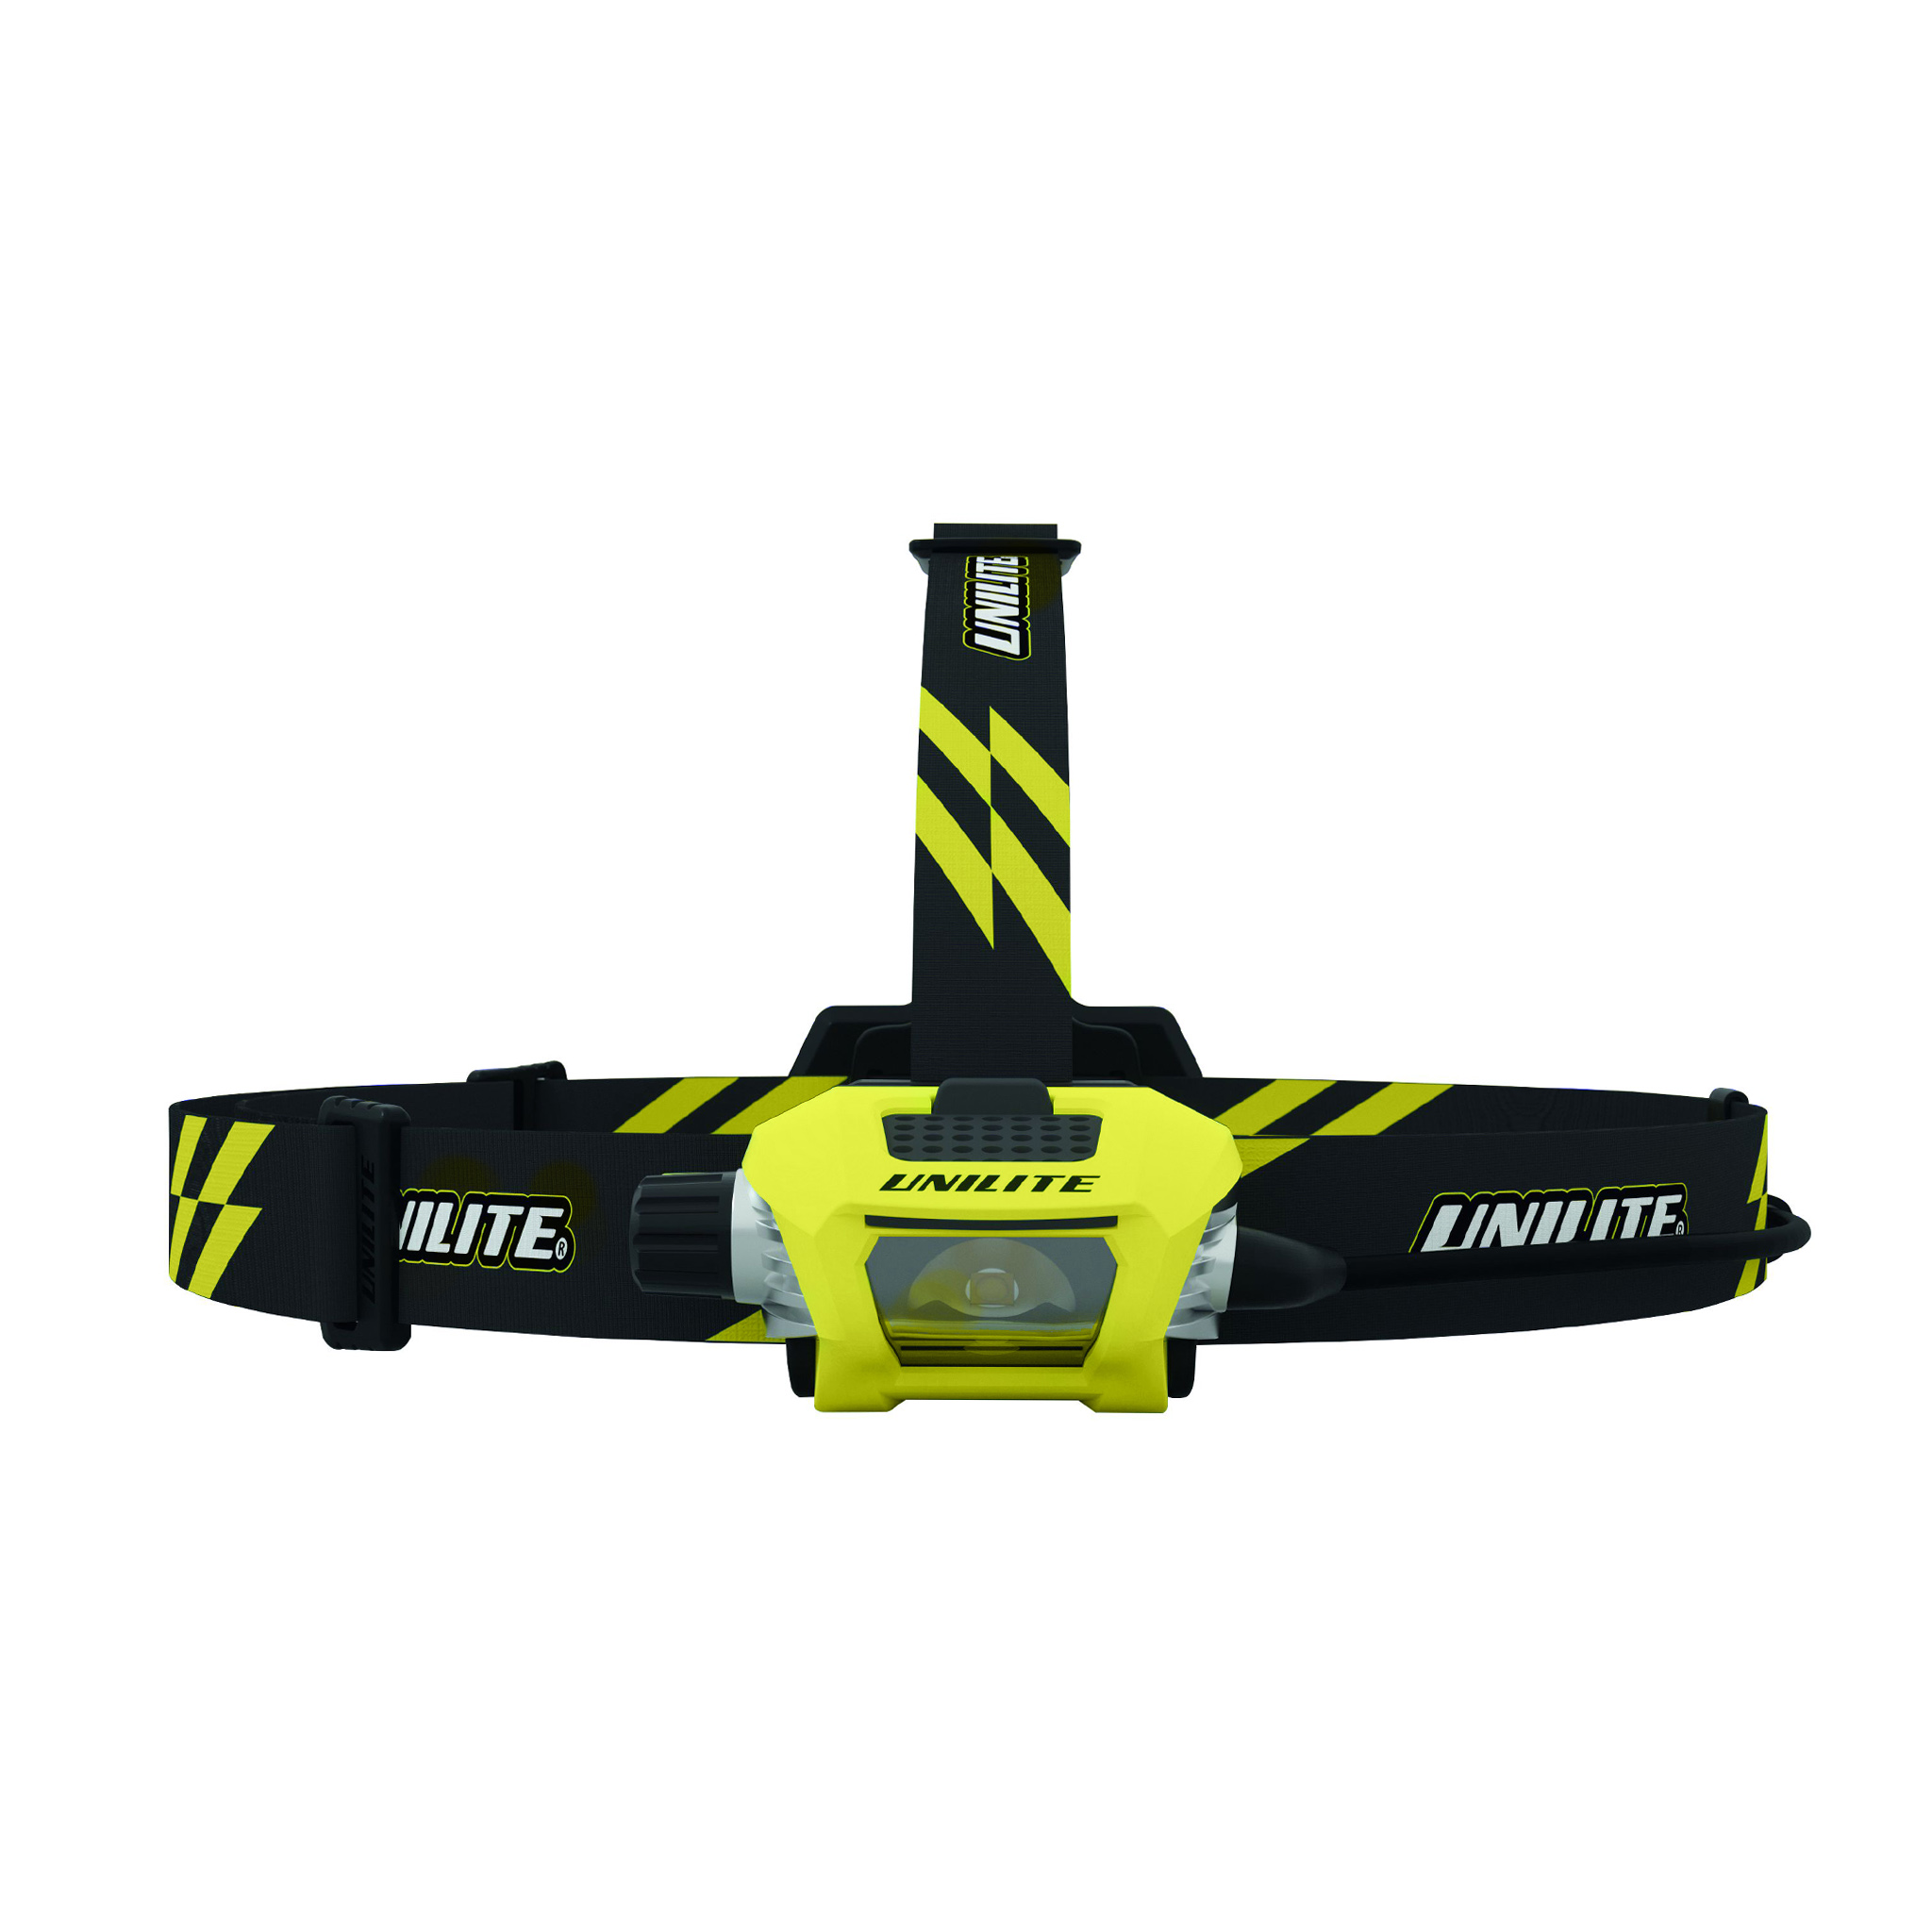 Pannlampa Unilite PS-HDL9R, 750 lm